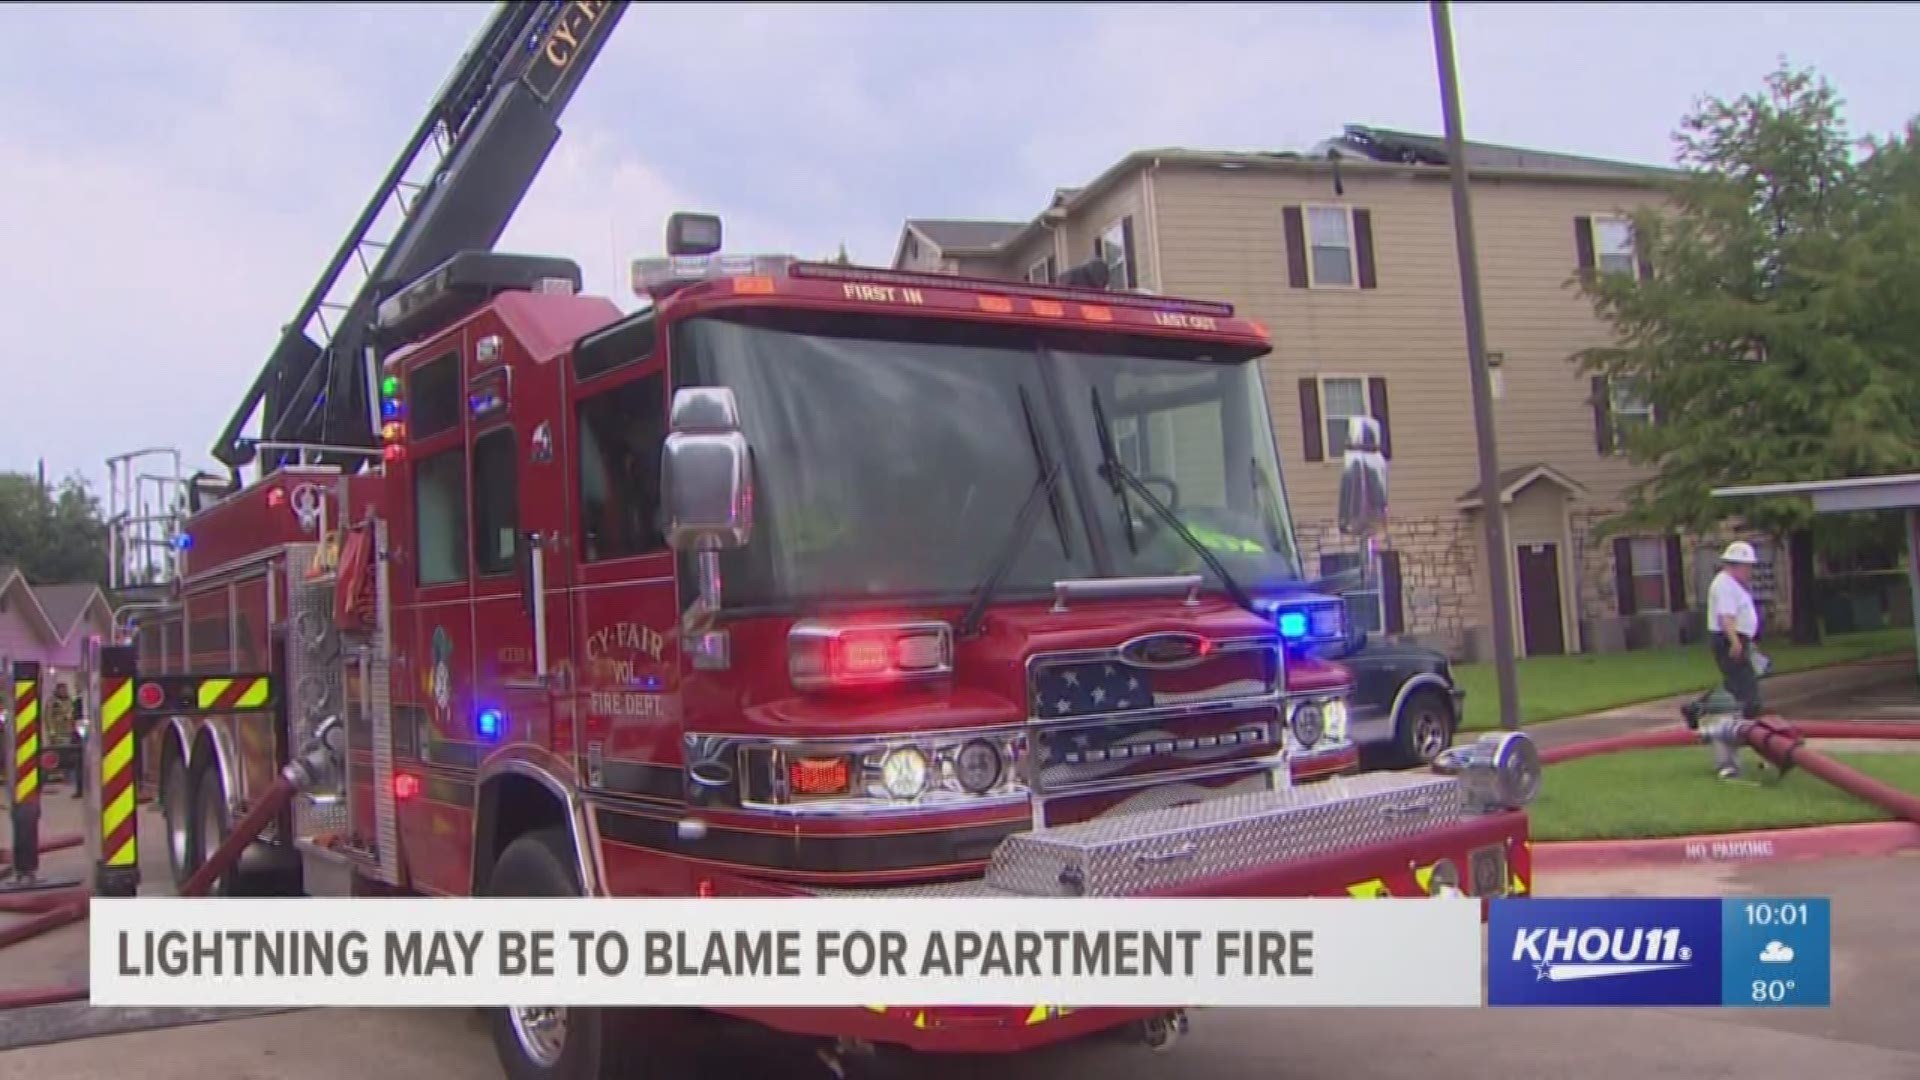 Fire investigators say lightning is to blame for a fire that damage two dozen apartment units in northwest Houston.